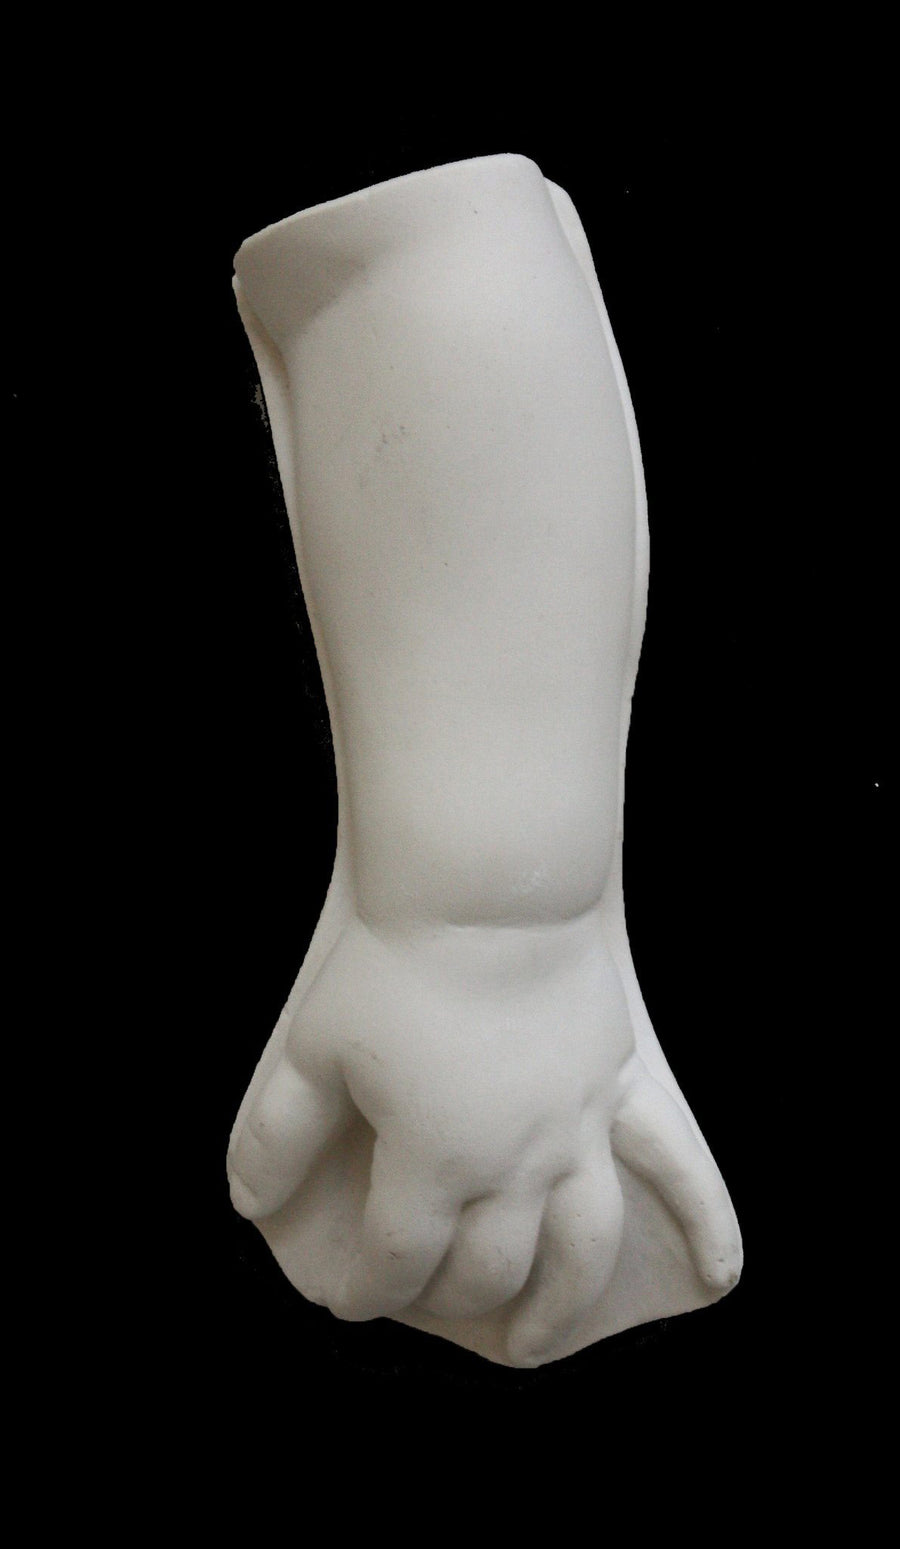 photo of white plaster cast sculpture of baby lower arm against black background